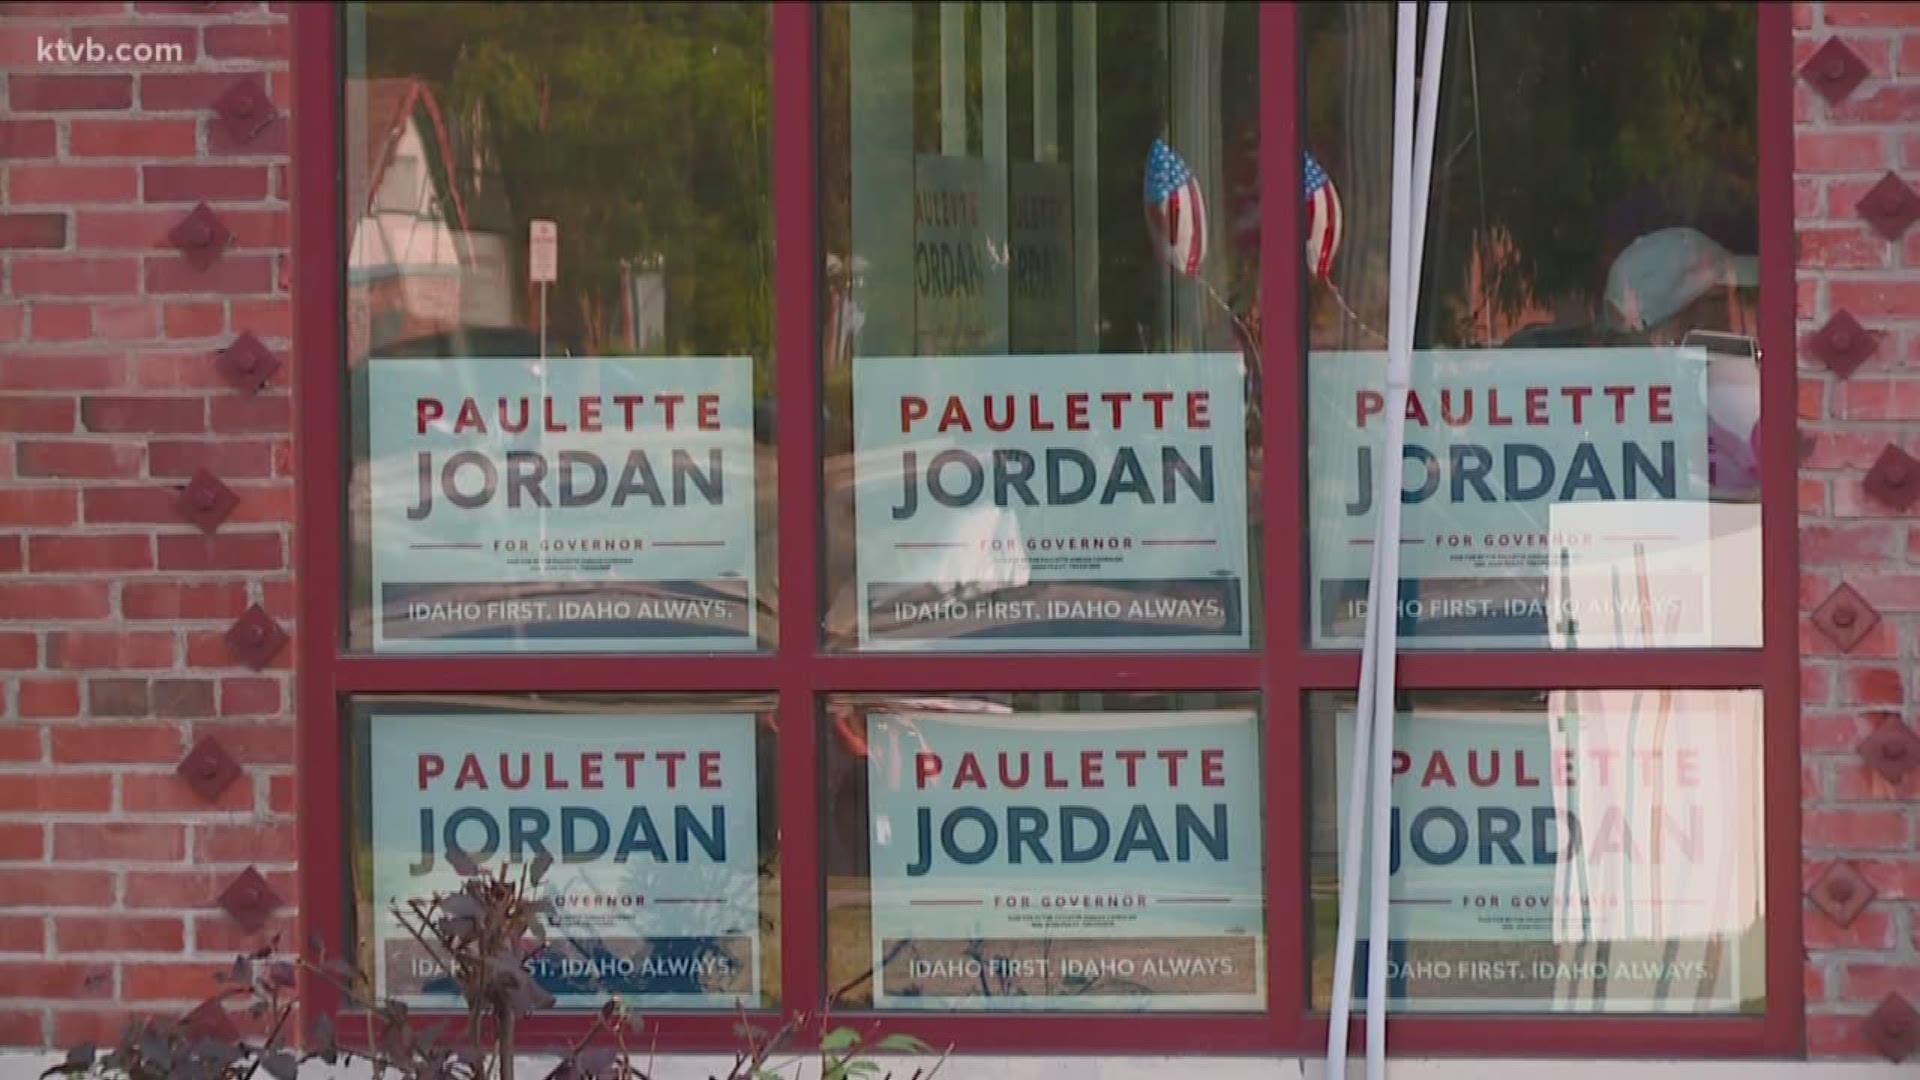 With the November 6, 2018, election closing in fast, three people left the campaign last week. It's not the first time staff have exited before an election. Jordan's acting campaign manager says this latest shake-up was planned.